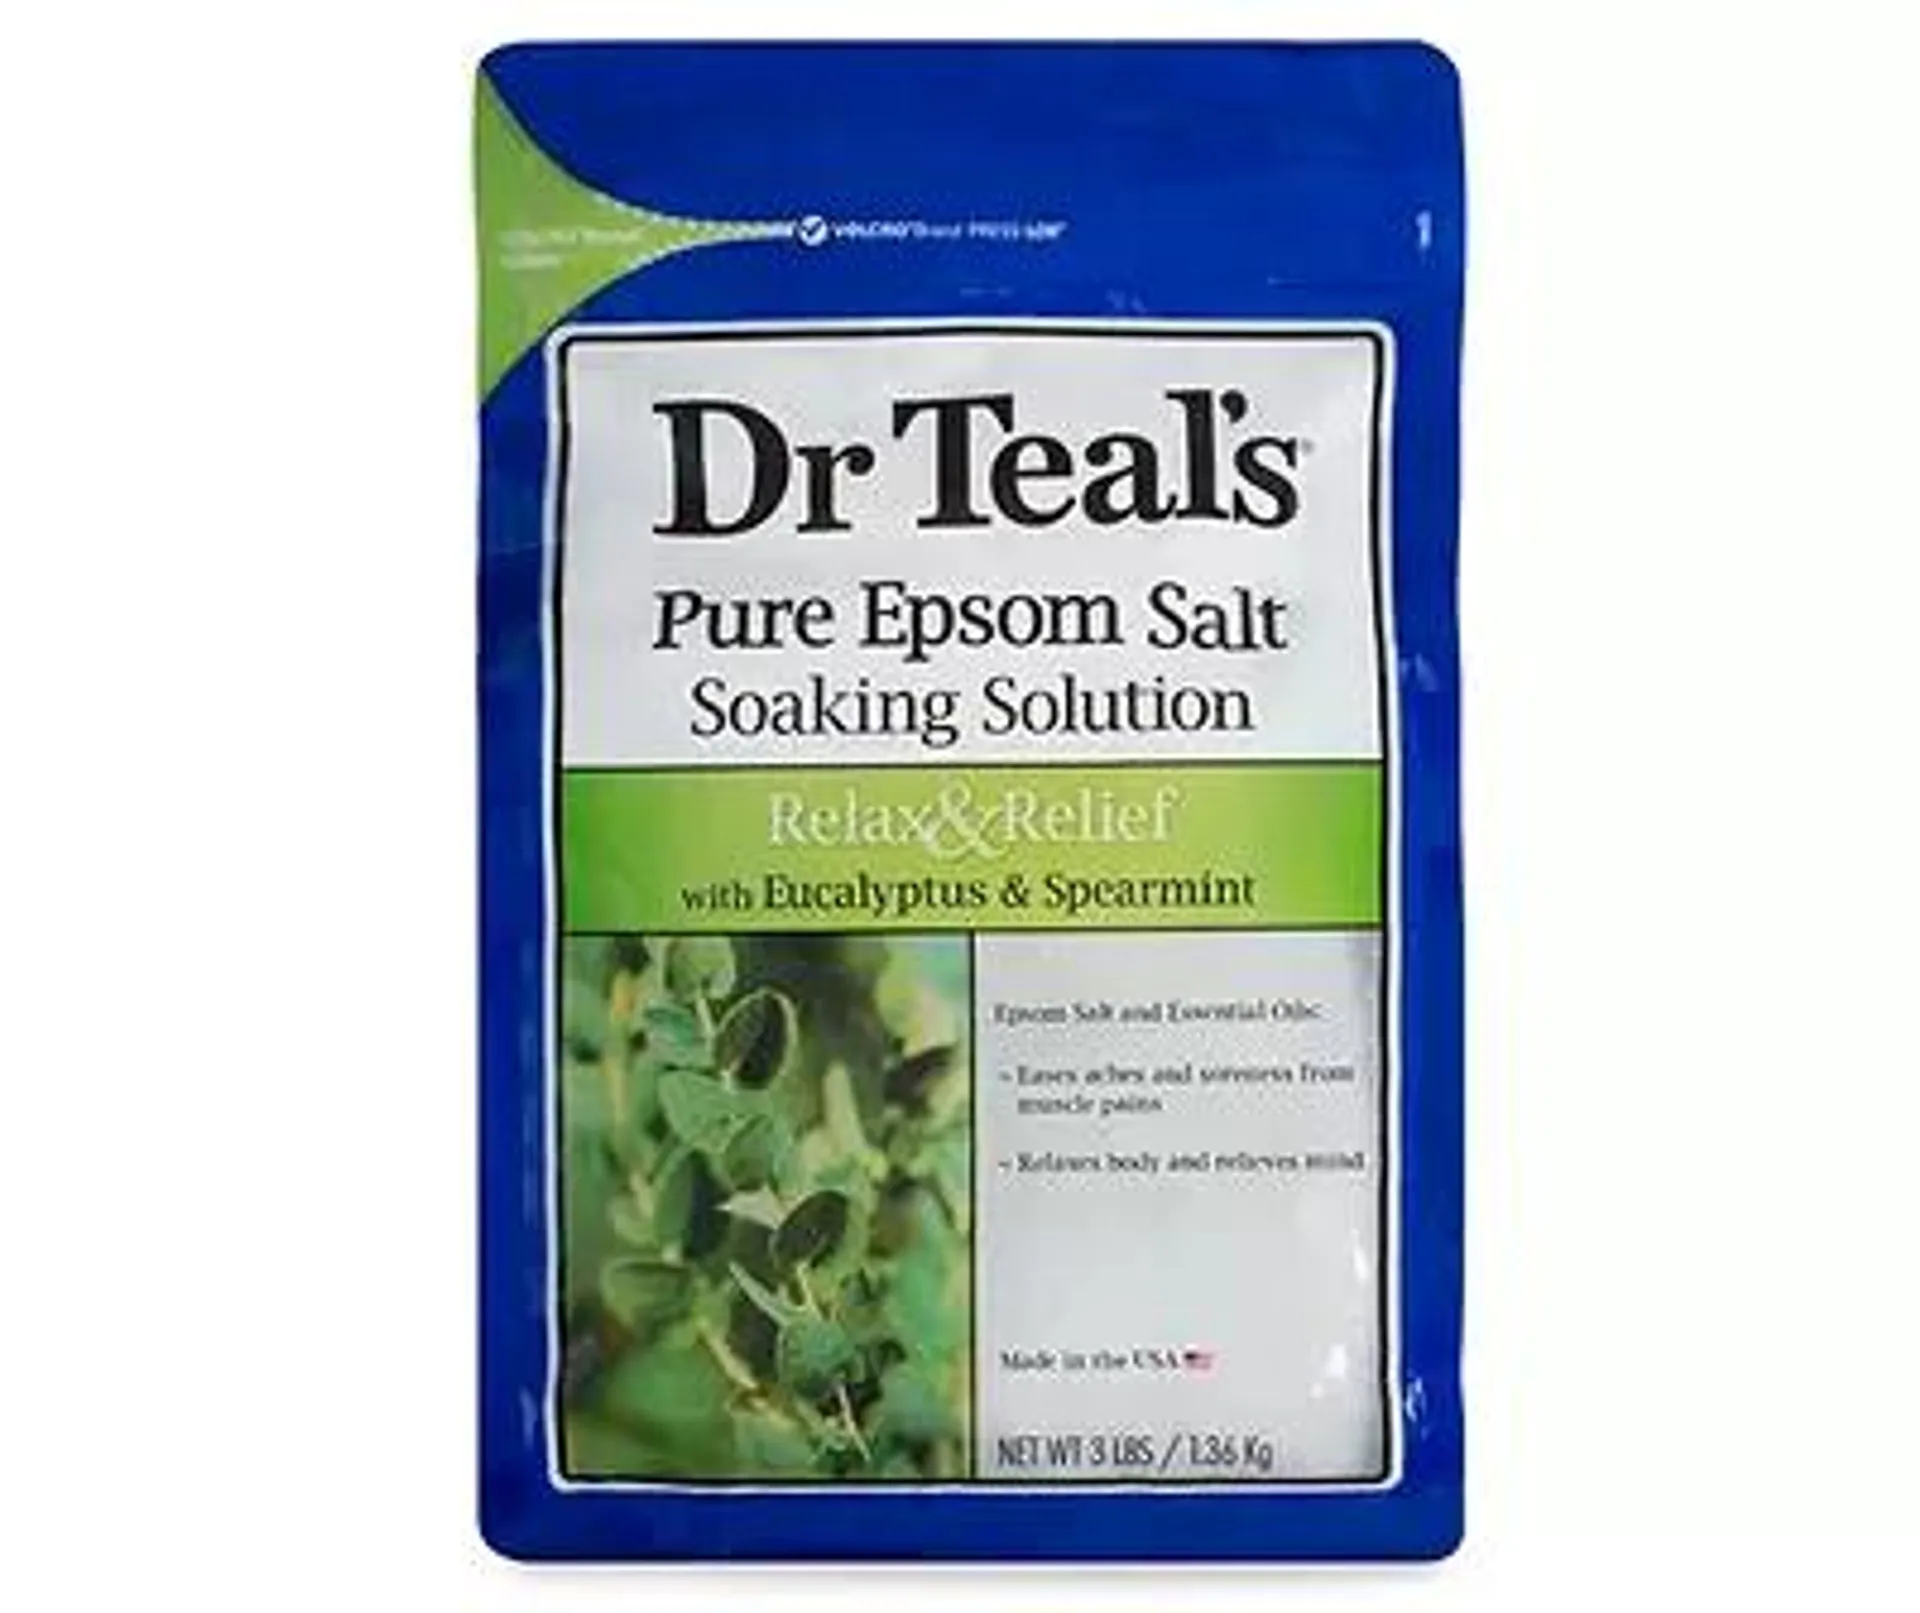 Relax & Relief Soaking Solution, 3 Lbs.